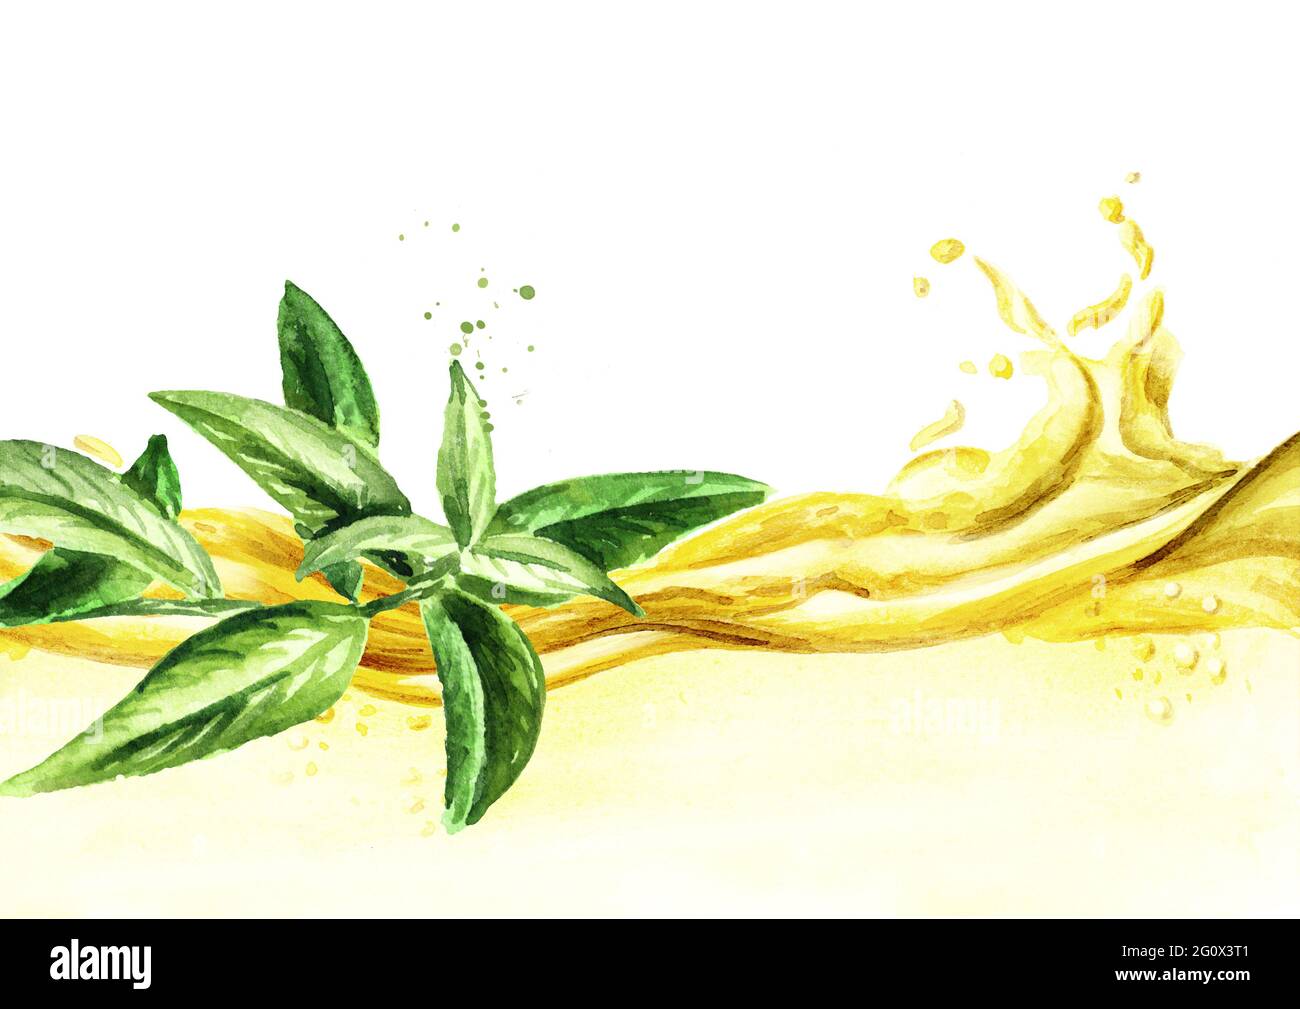 Lemon verbena essential oil wave. Watercolor hand drawn illustration, isolated on white background Stock Photo